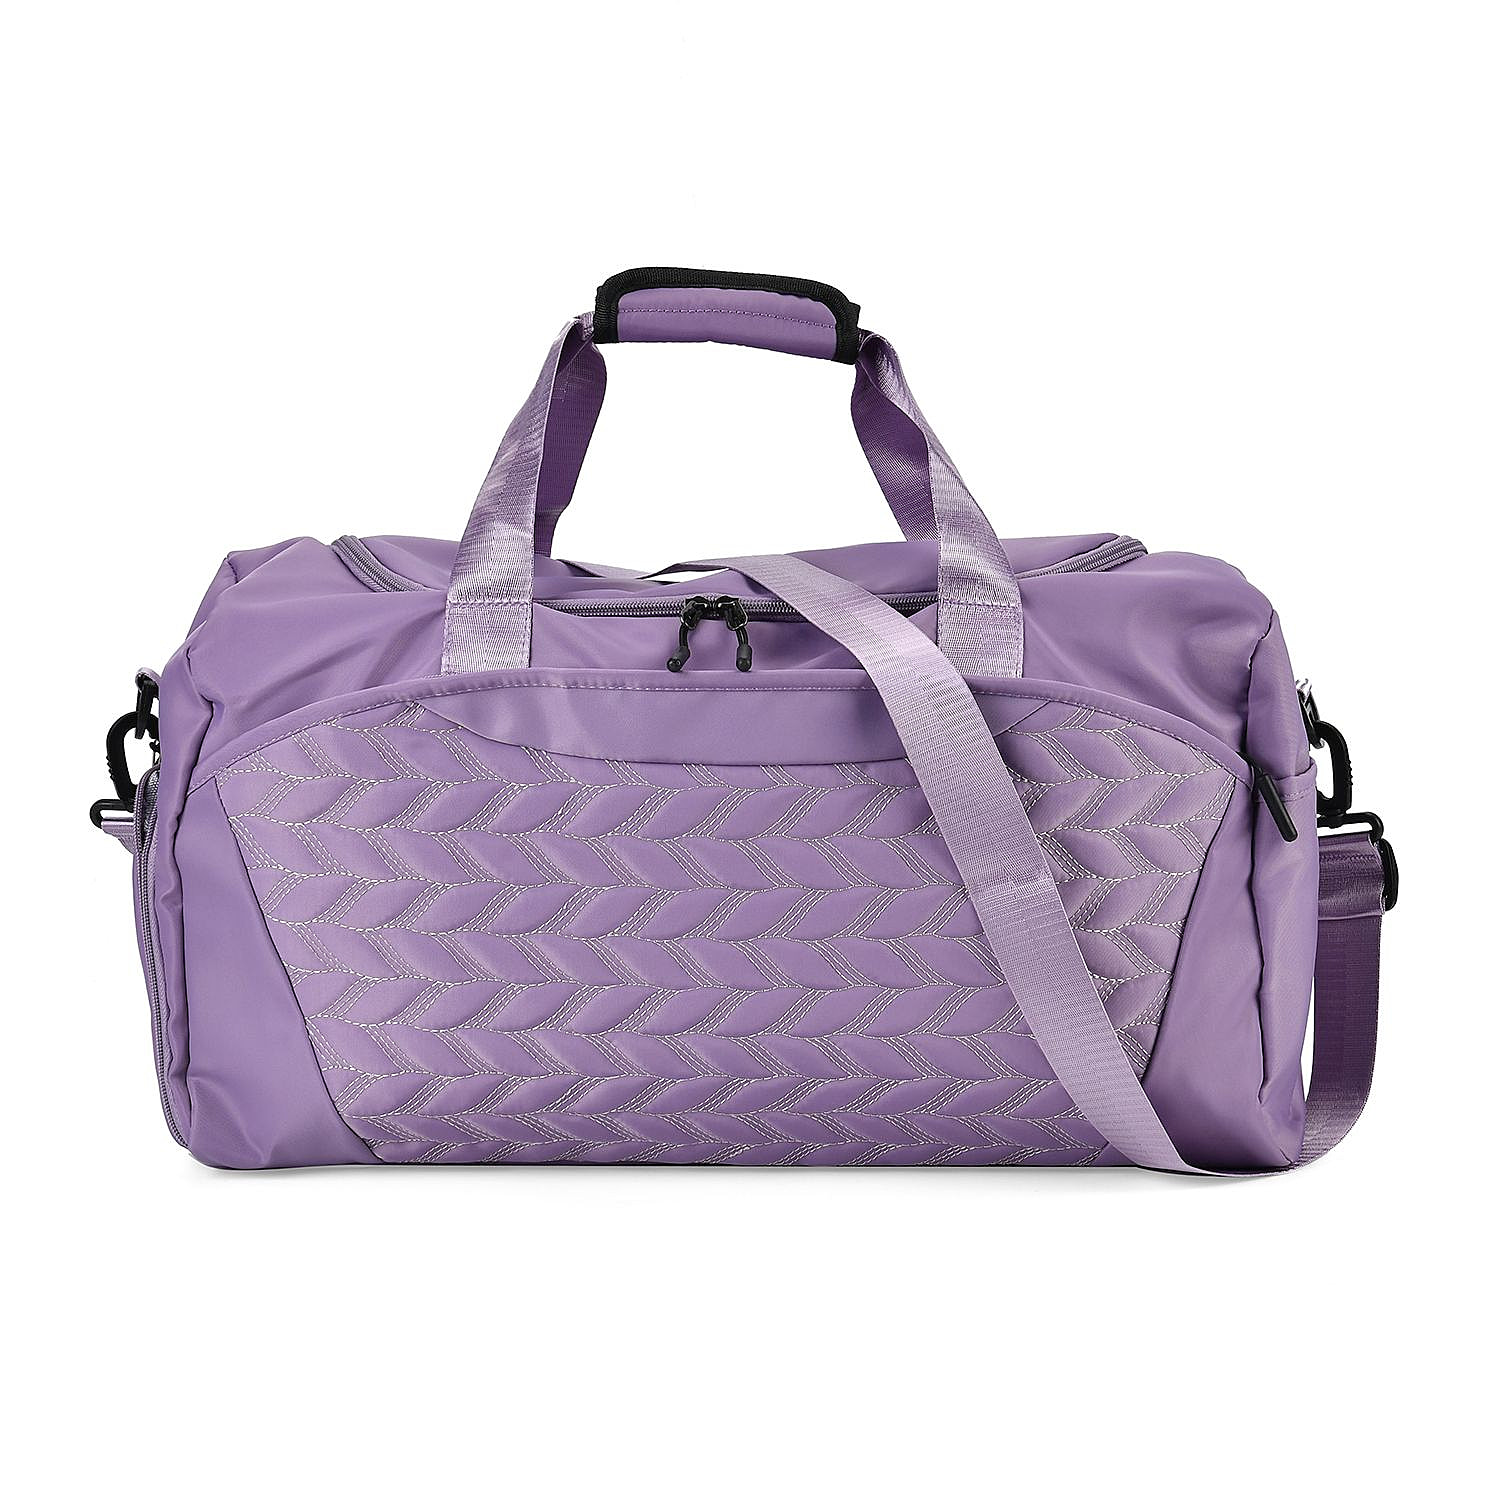 Travel Duffle Bag with Quilted Leaves Pattern - Purple